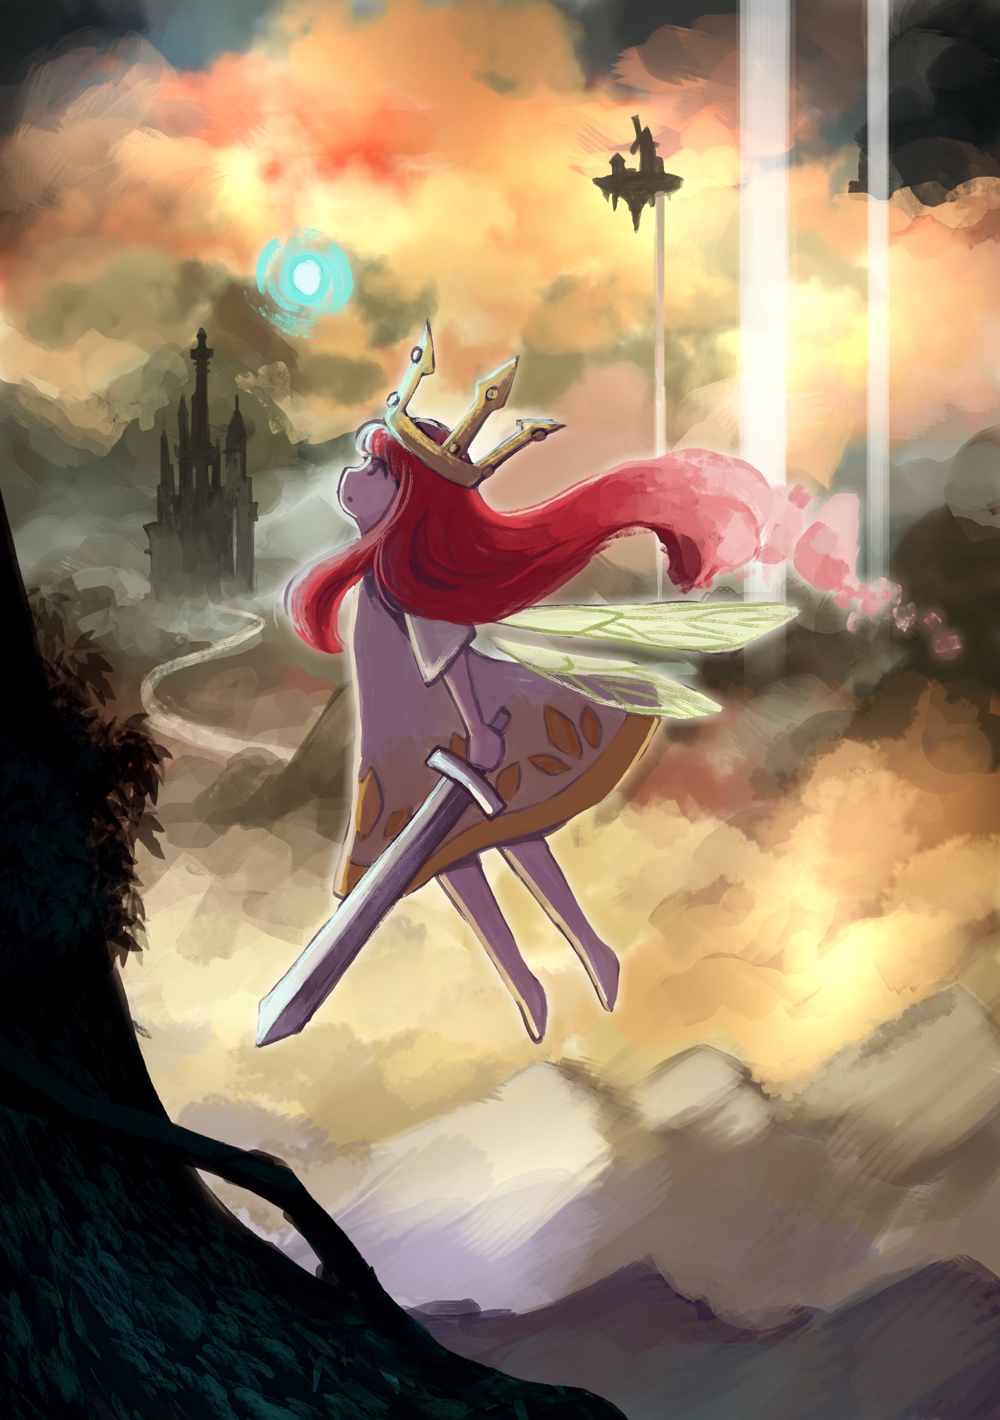 :o barefoot castle child_of_light_(game) cloud crown floating_island flying full_body highres holding igniculus long_hair mashiro_kiichi outdoors pink_hair princess_aurora profile short_sleeves silhouette sword weapon wings